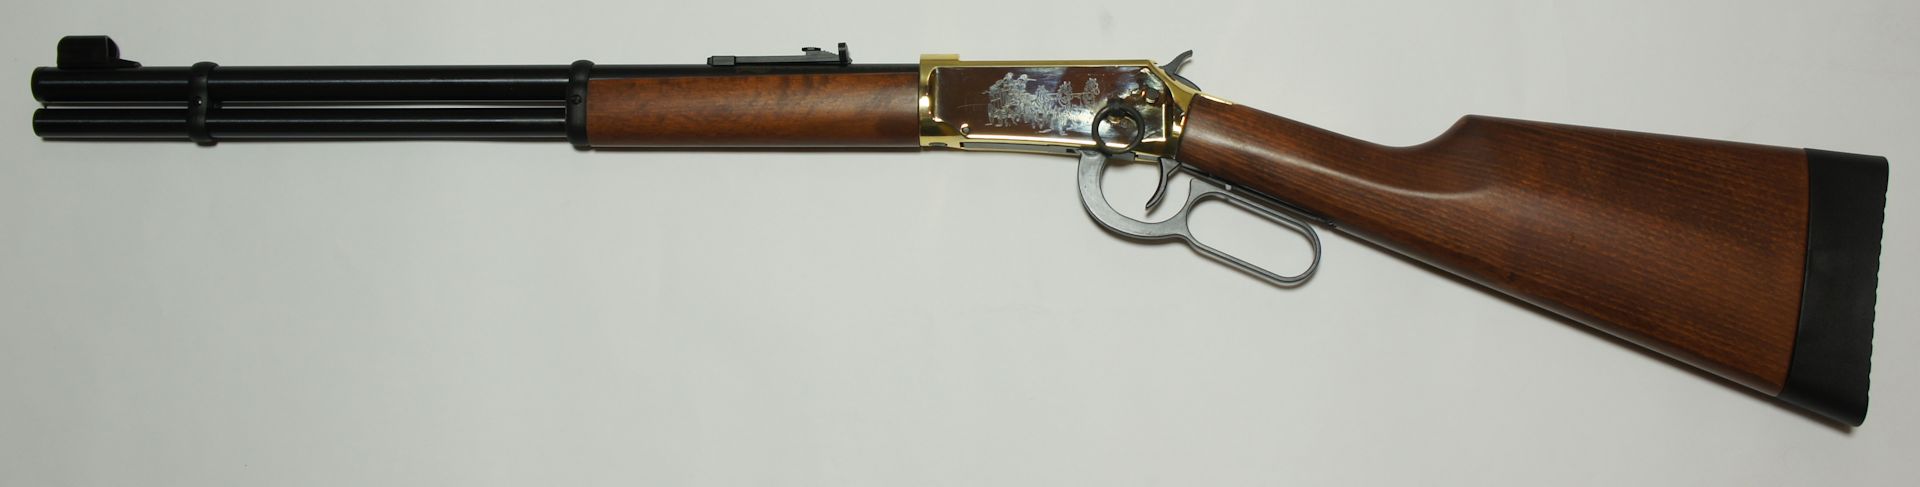 Walther Lever Action Wells fargo 